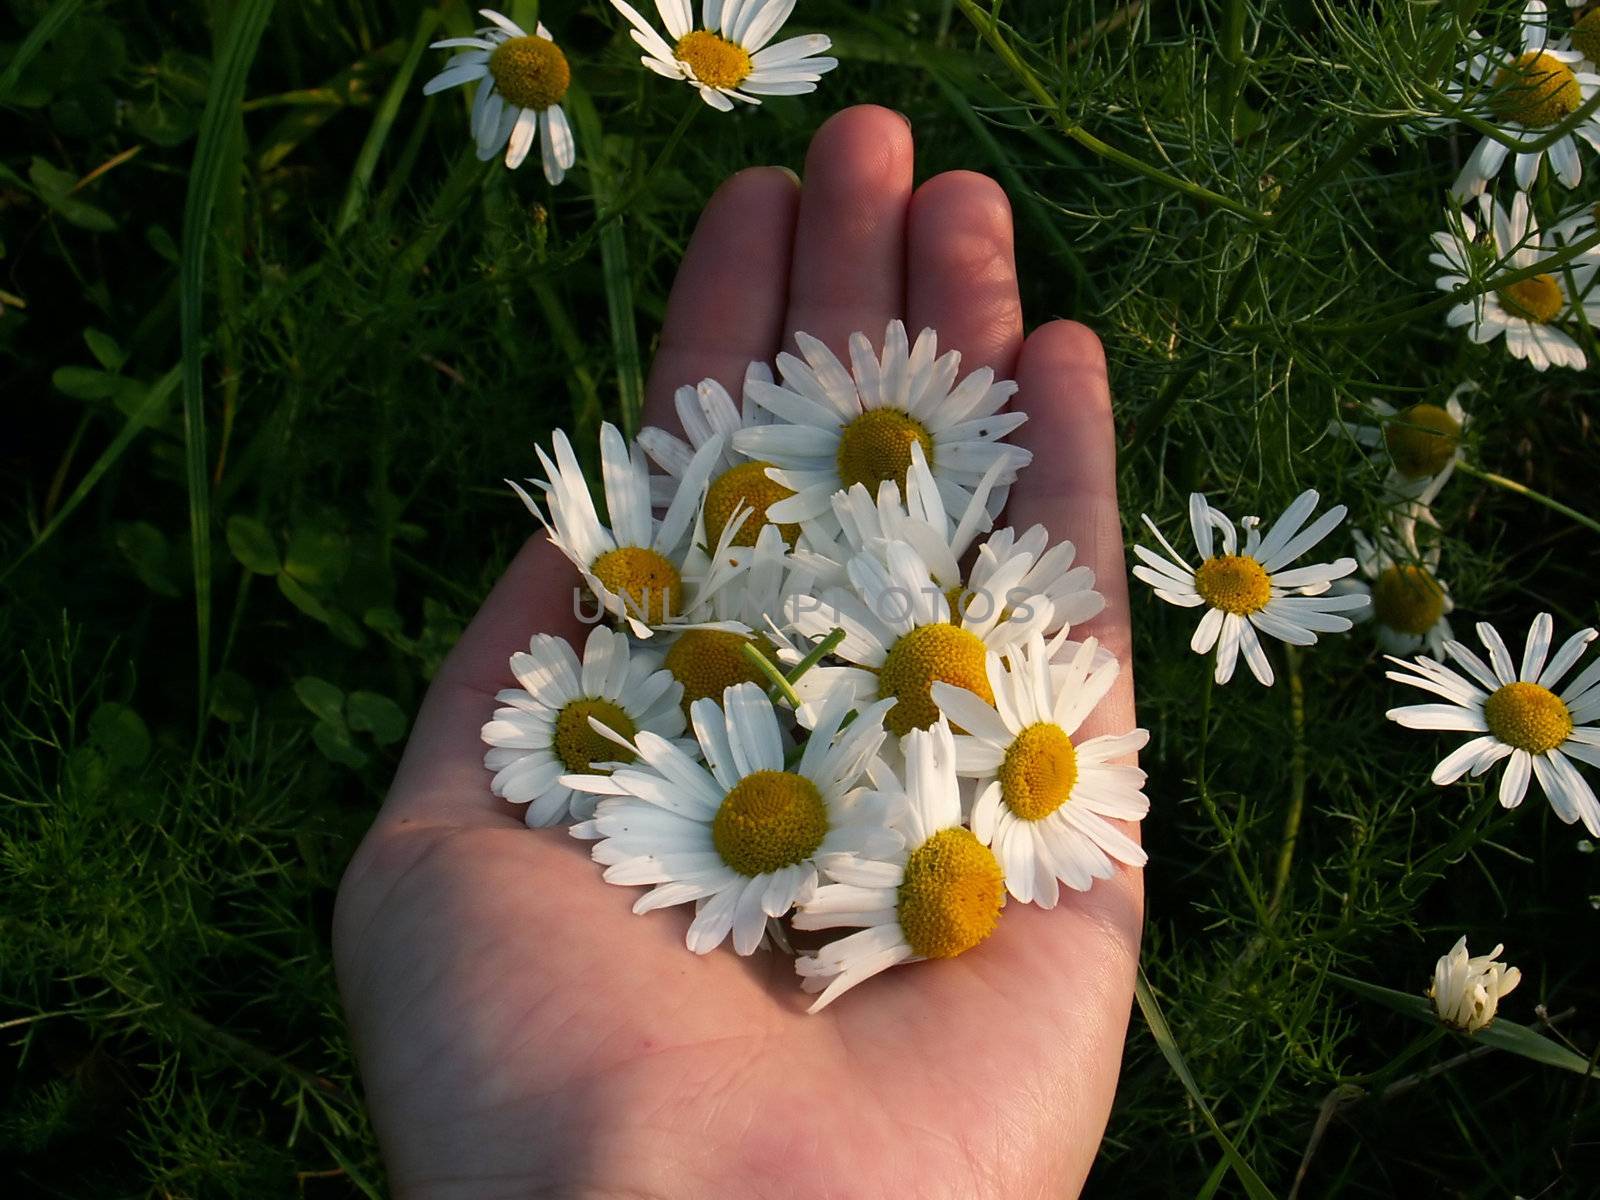 detail of an open hand and camomile